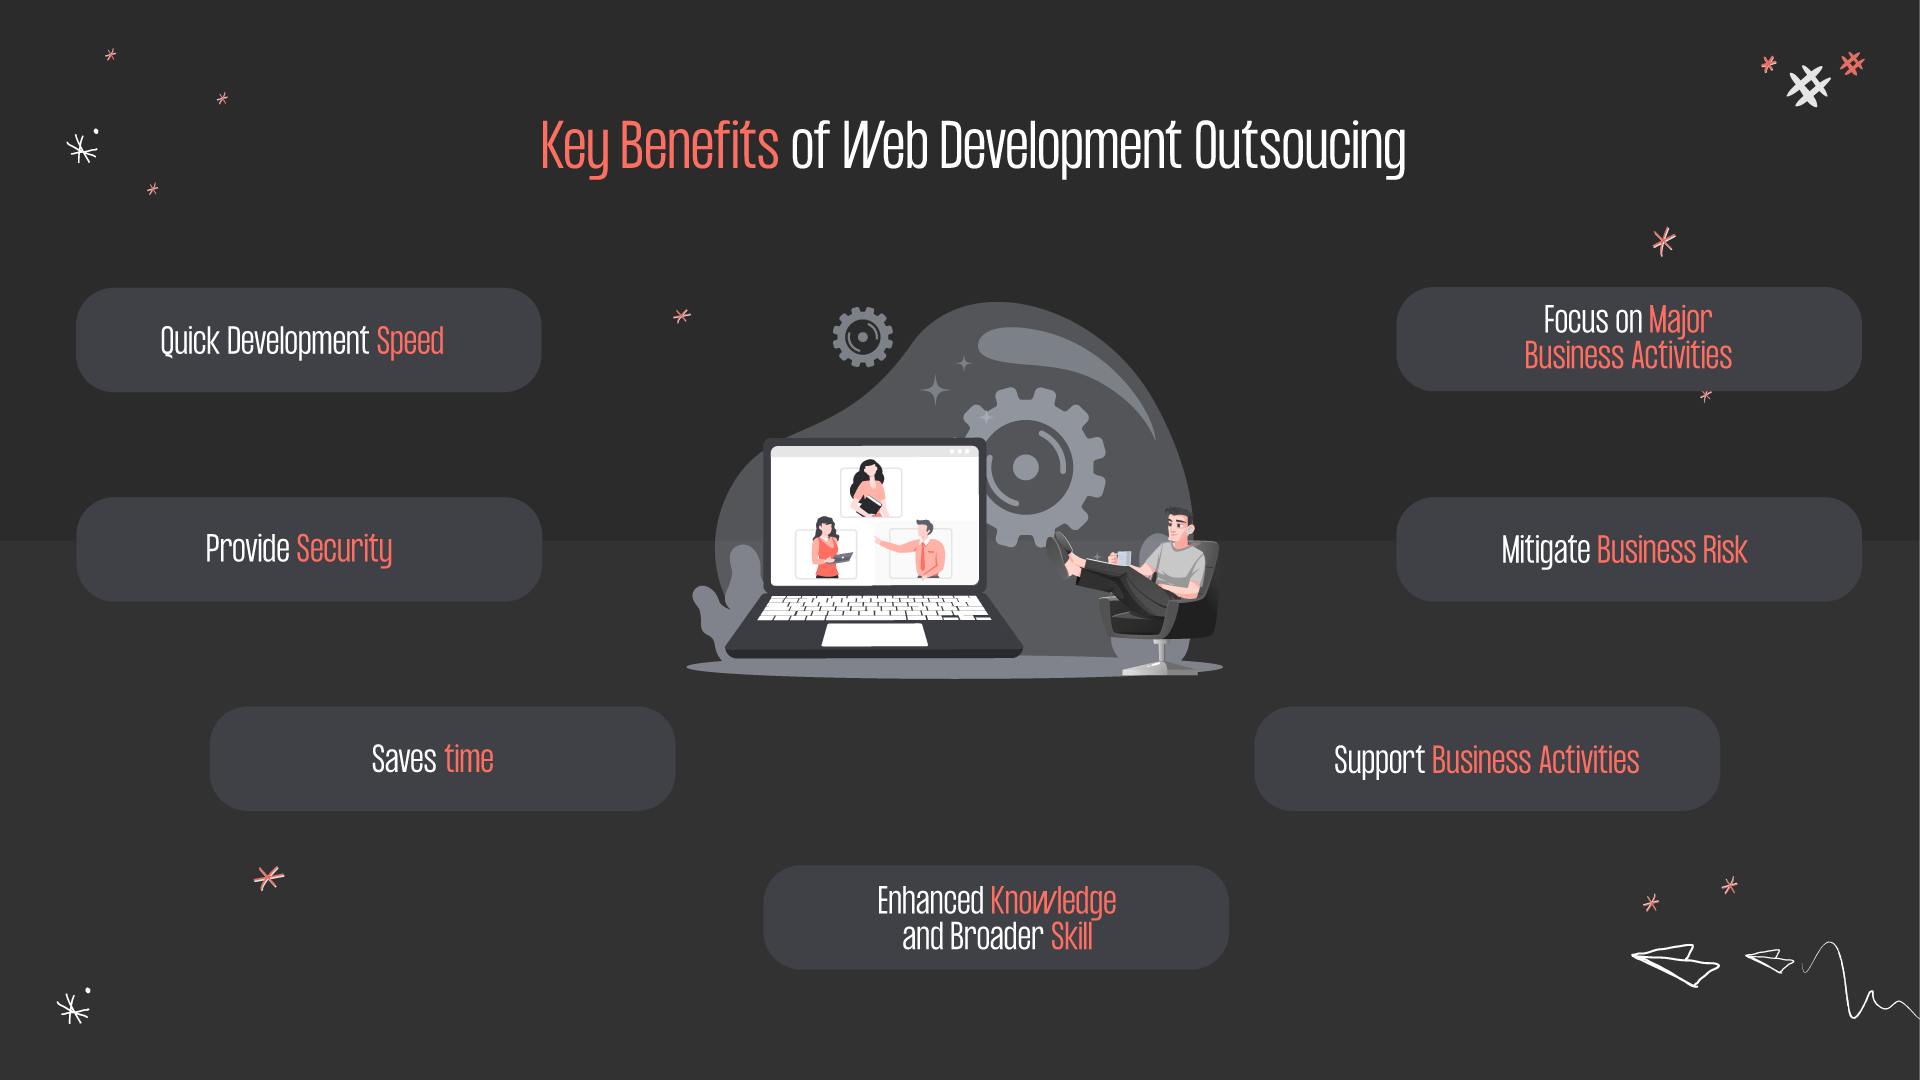 Key benefits of web design outsourcing